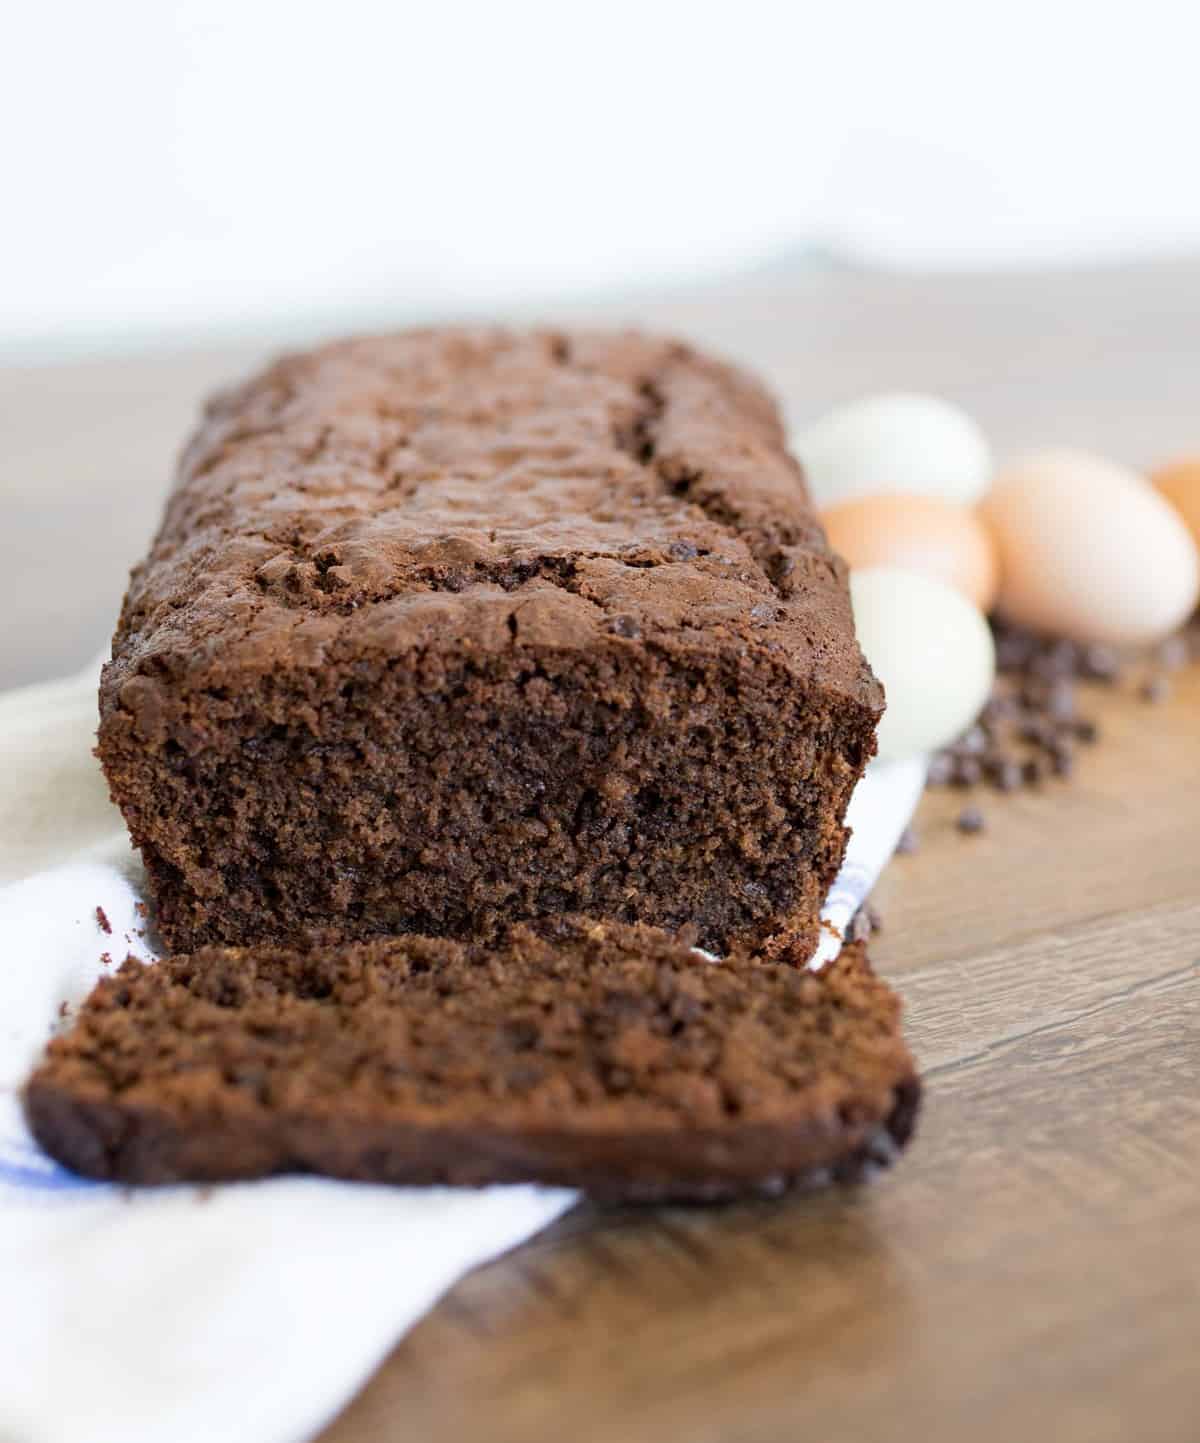 Chocolate zucchini bread that is rich, moist, and perfectly sweet with the addition of chocolate chips for good measure.